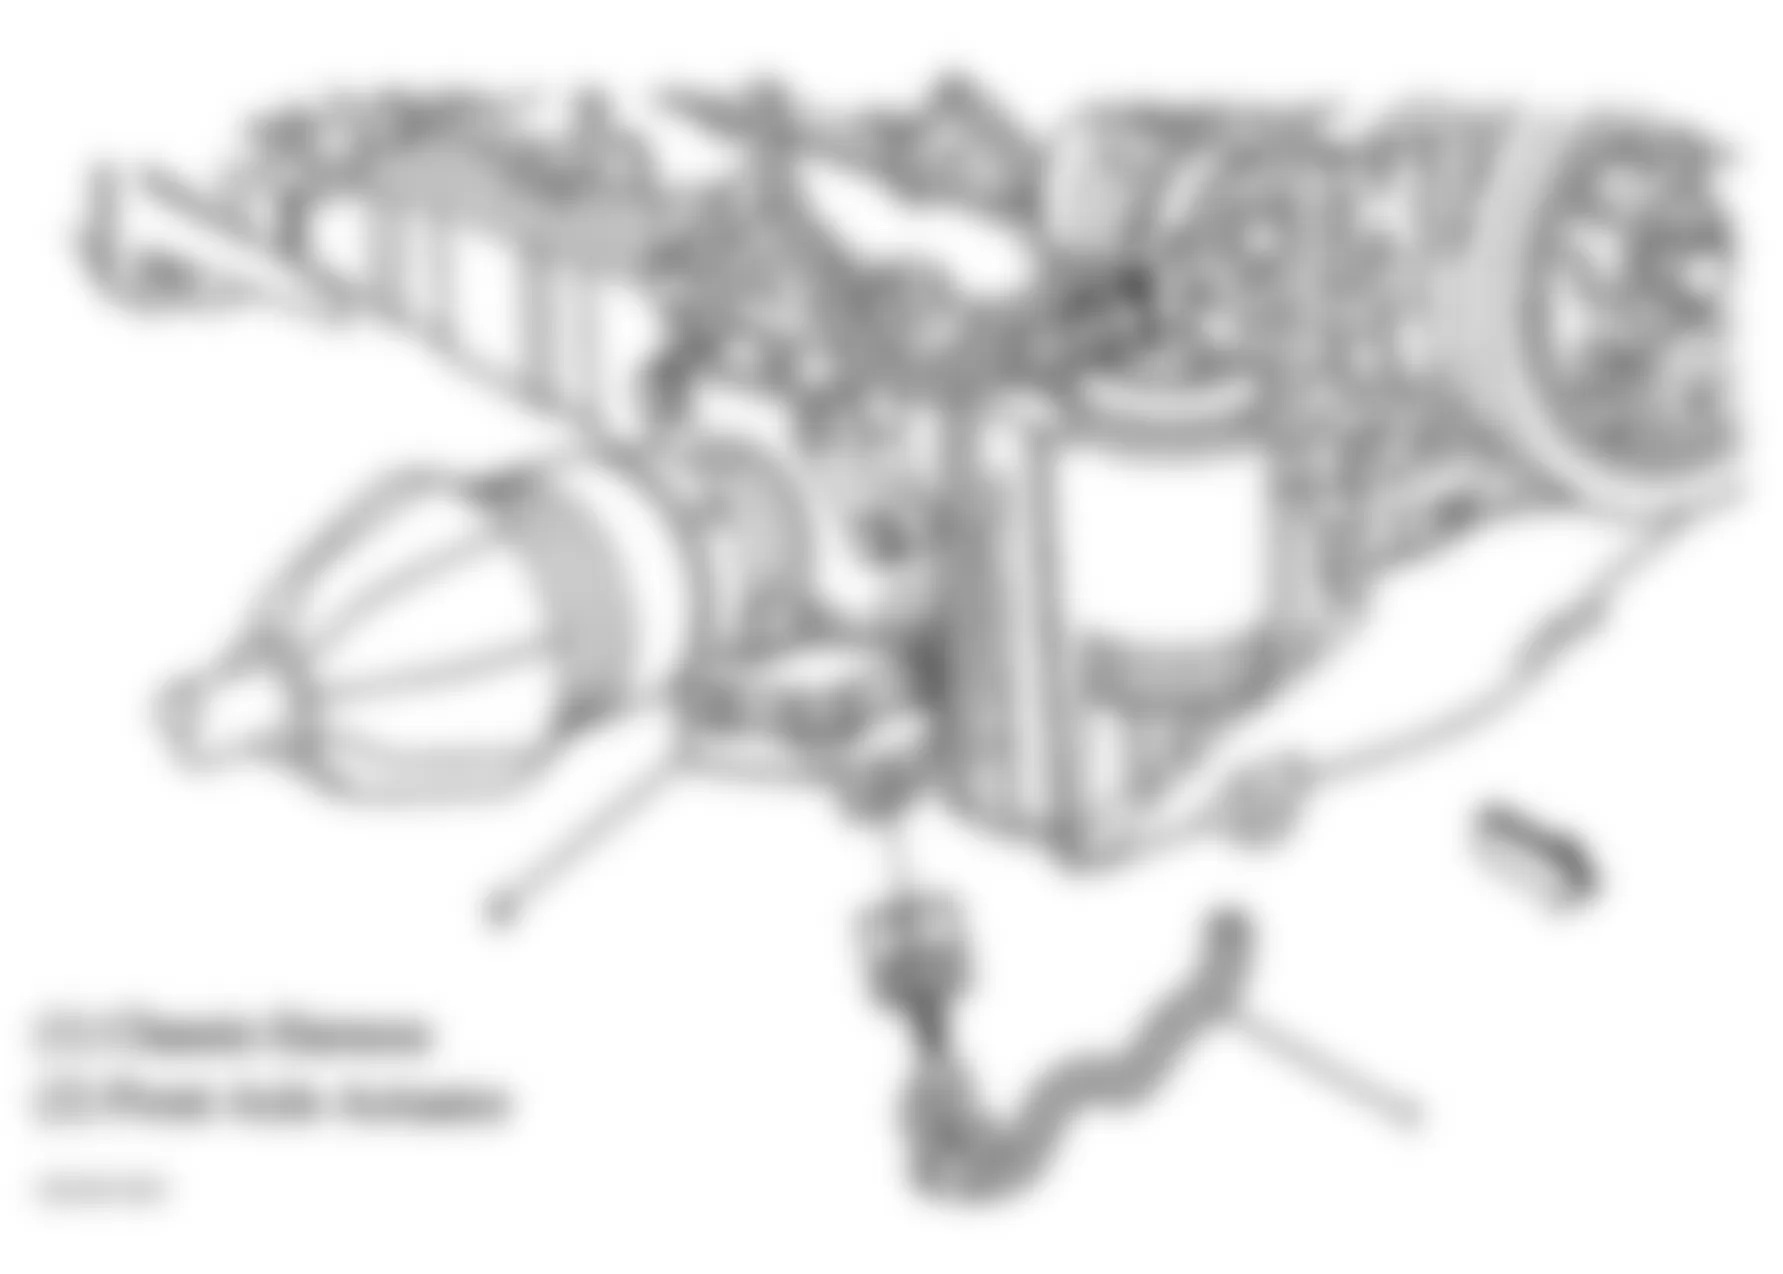 GMC Envoy XUV 2004 - Component Locations -  Right Front Of Engine (4.2L)